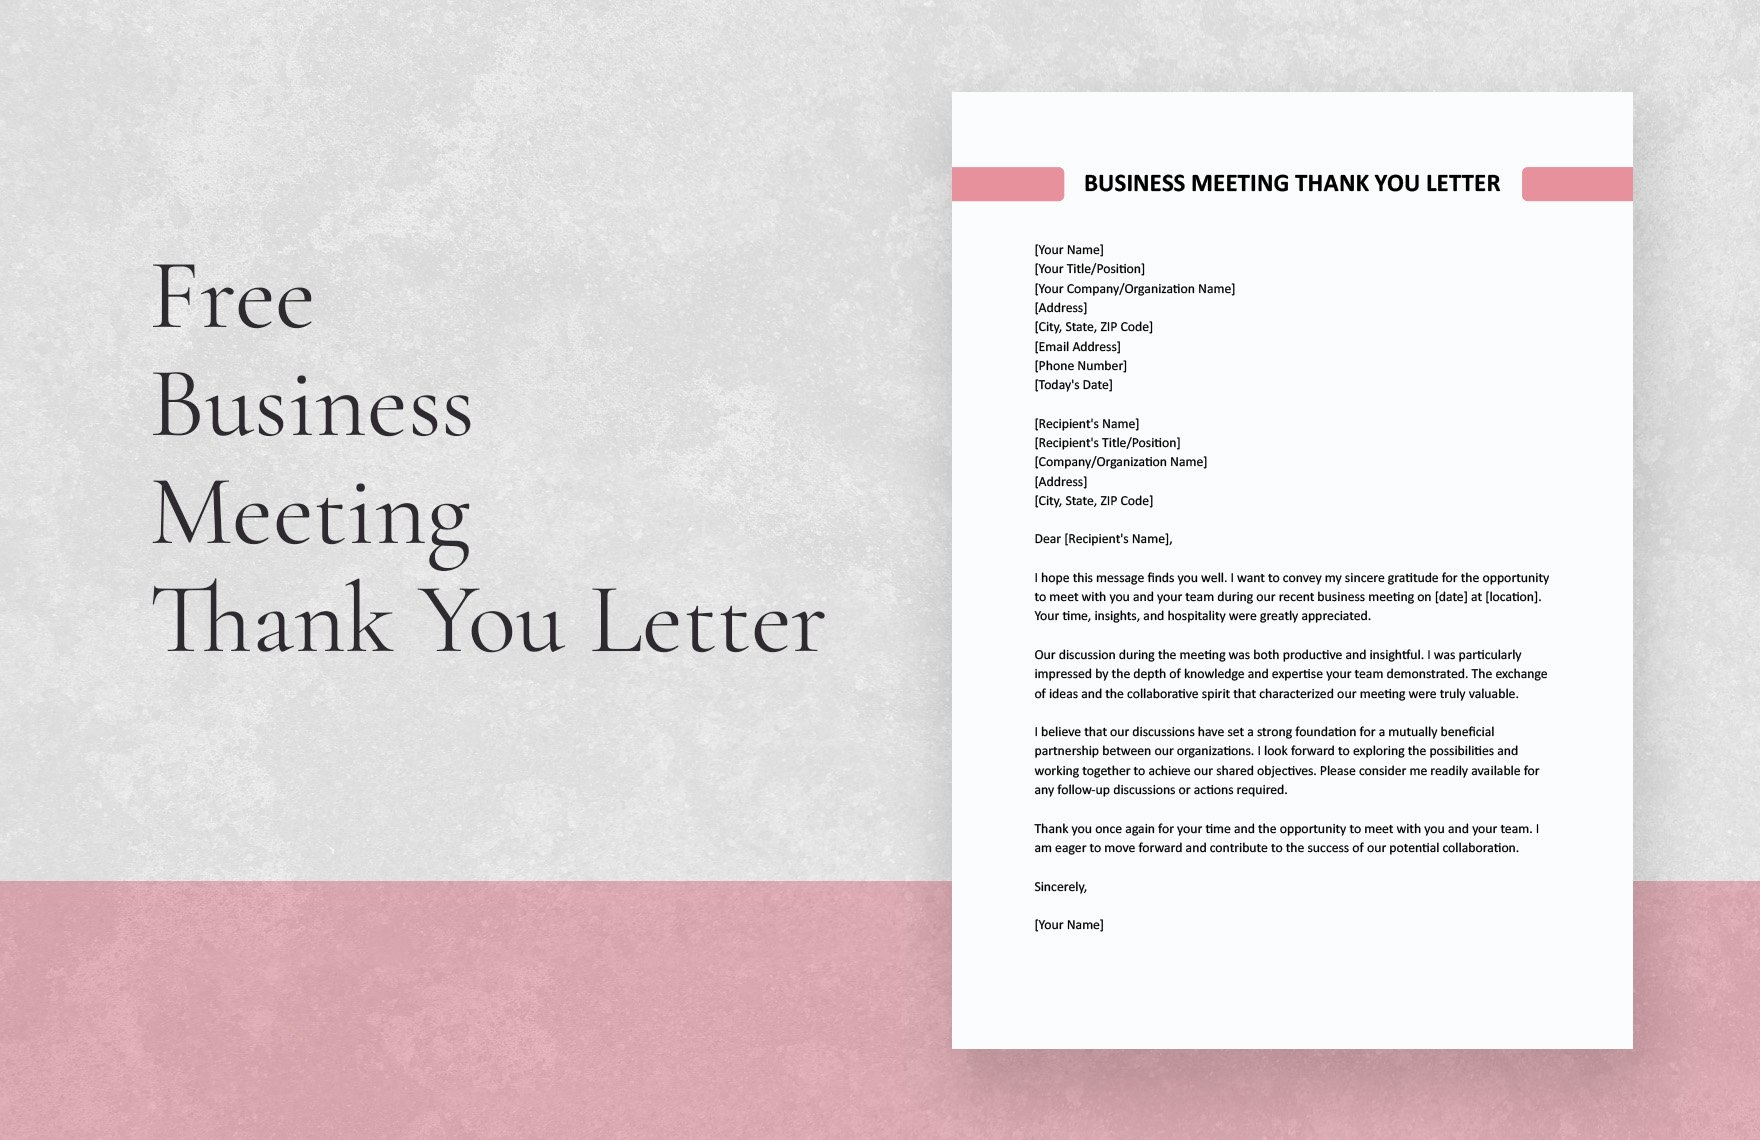 Business Meeting Thank You Letter